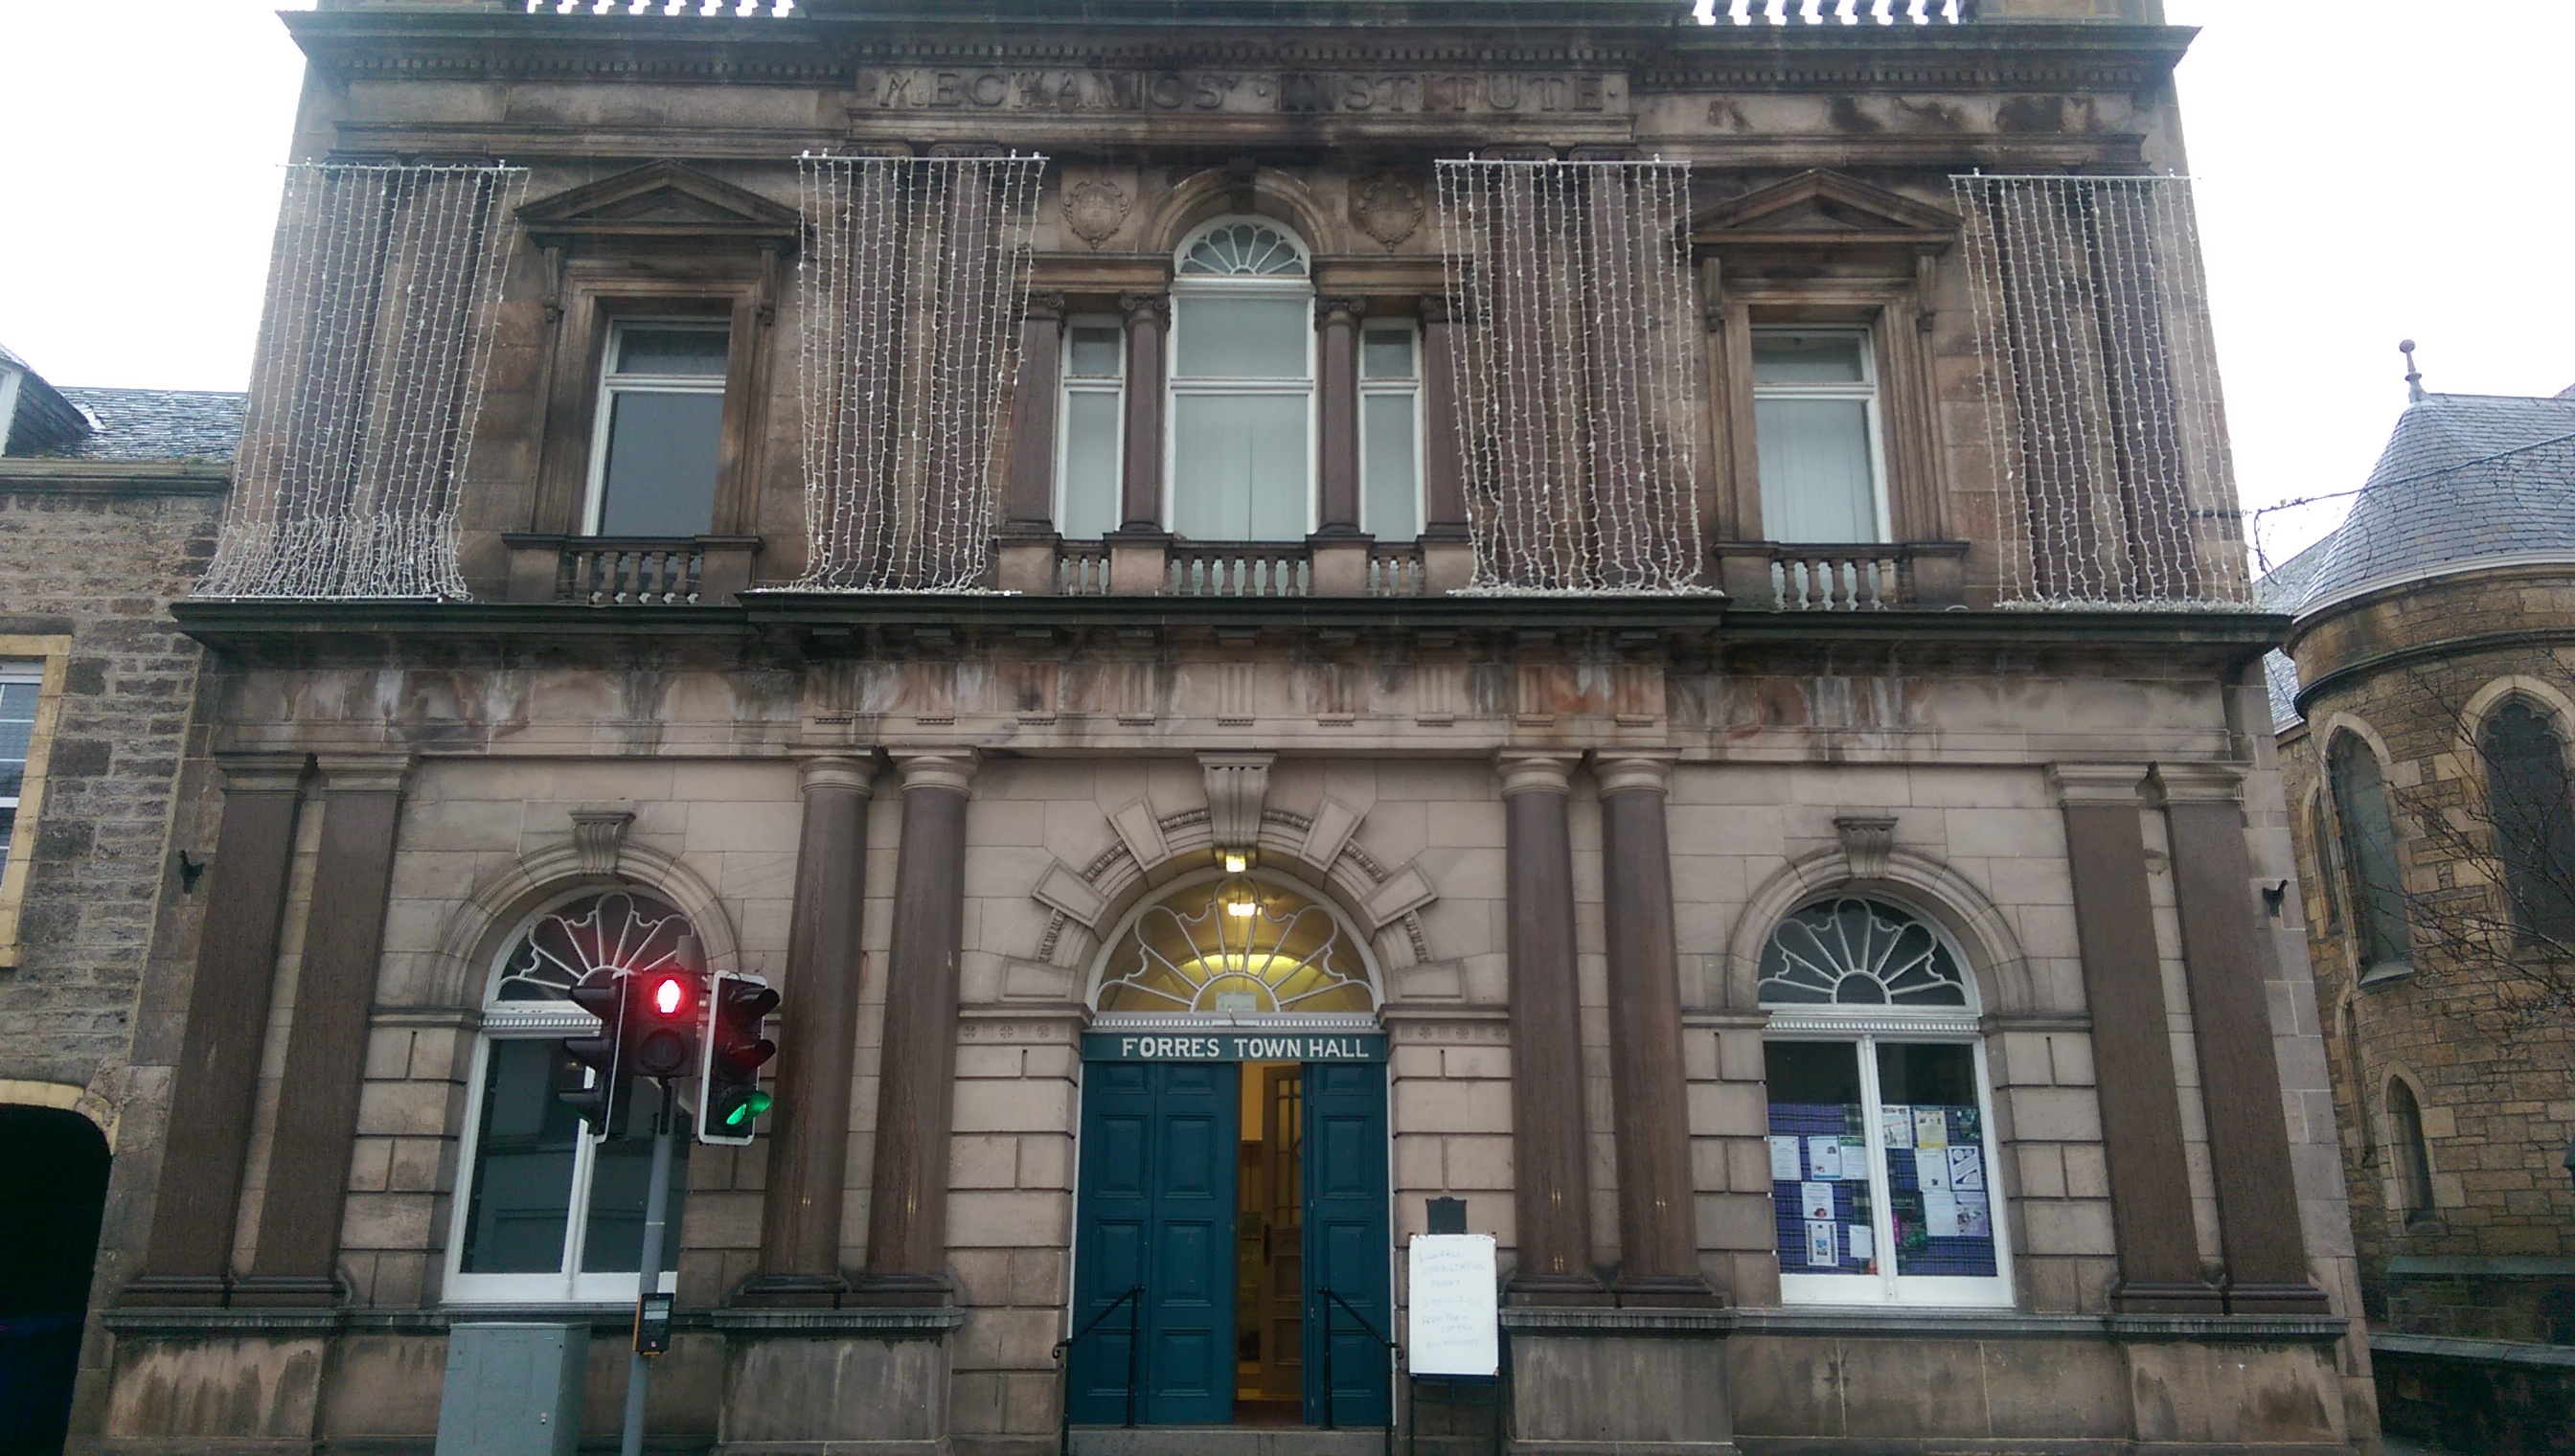 Forres Town Hall has stood on the High Street since the mid 19th Century.